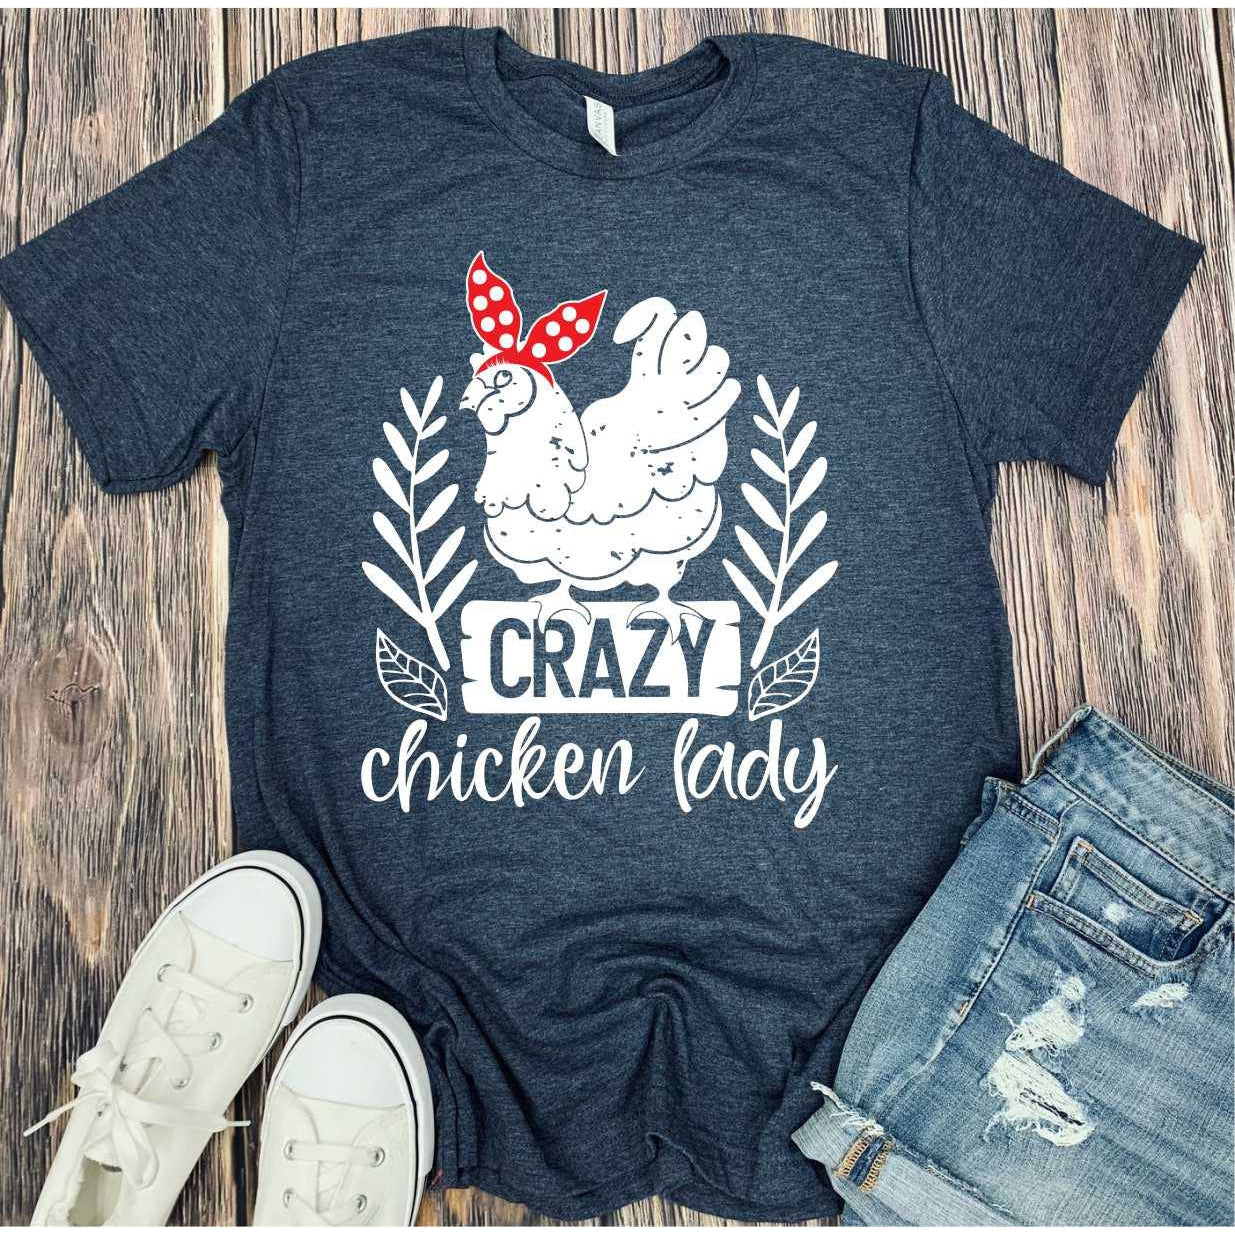 CRAZY CHICKEN LADY GRAPHIC TEE